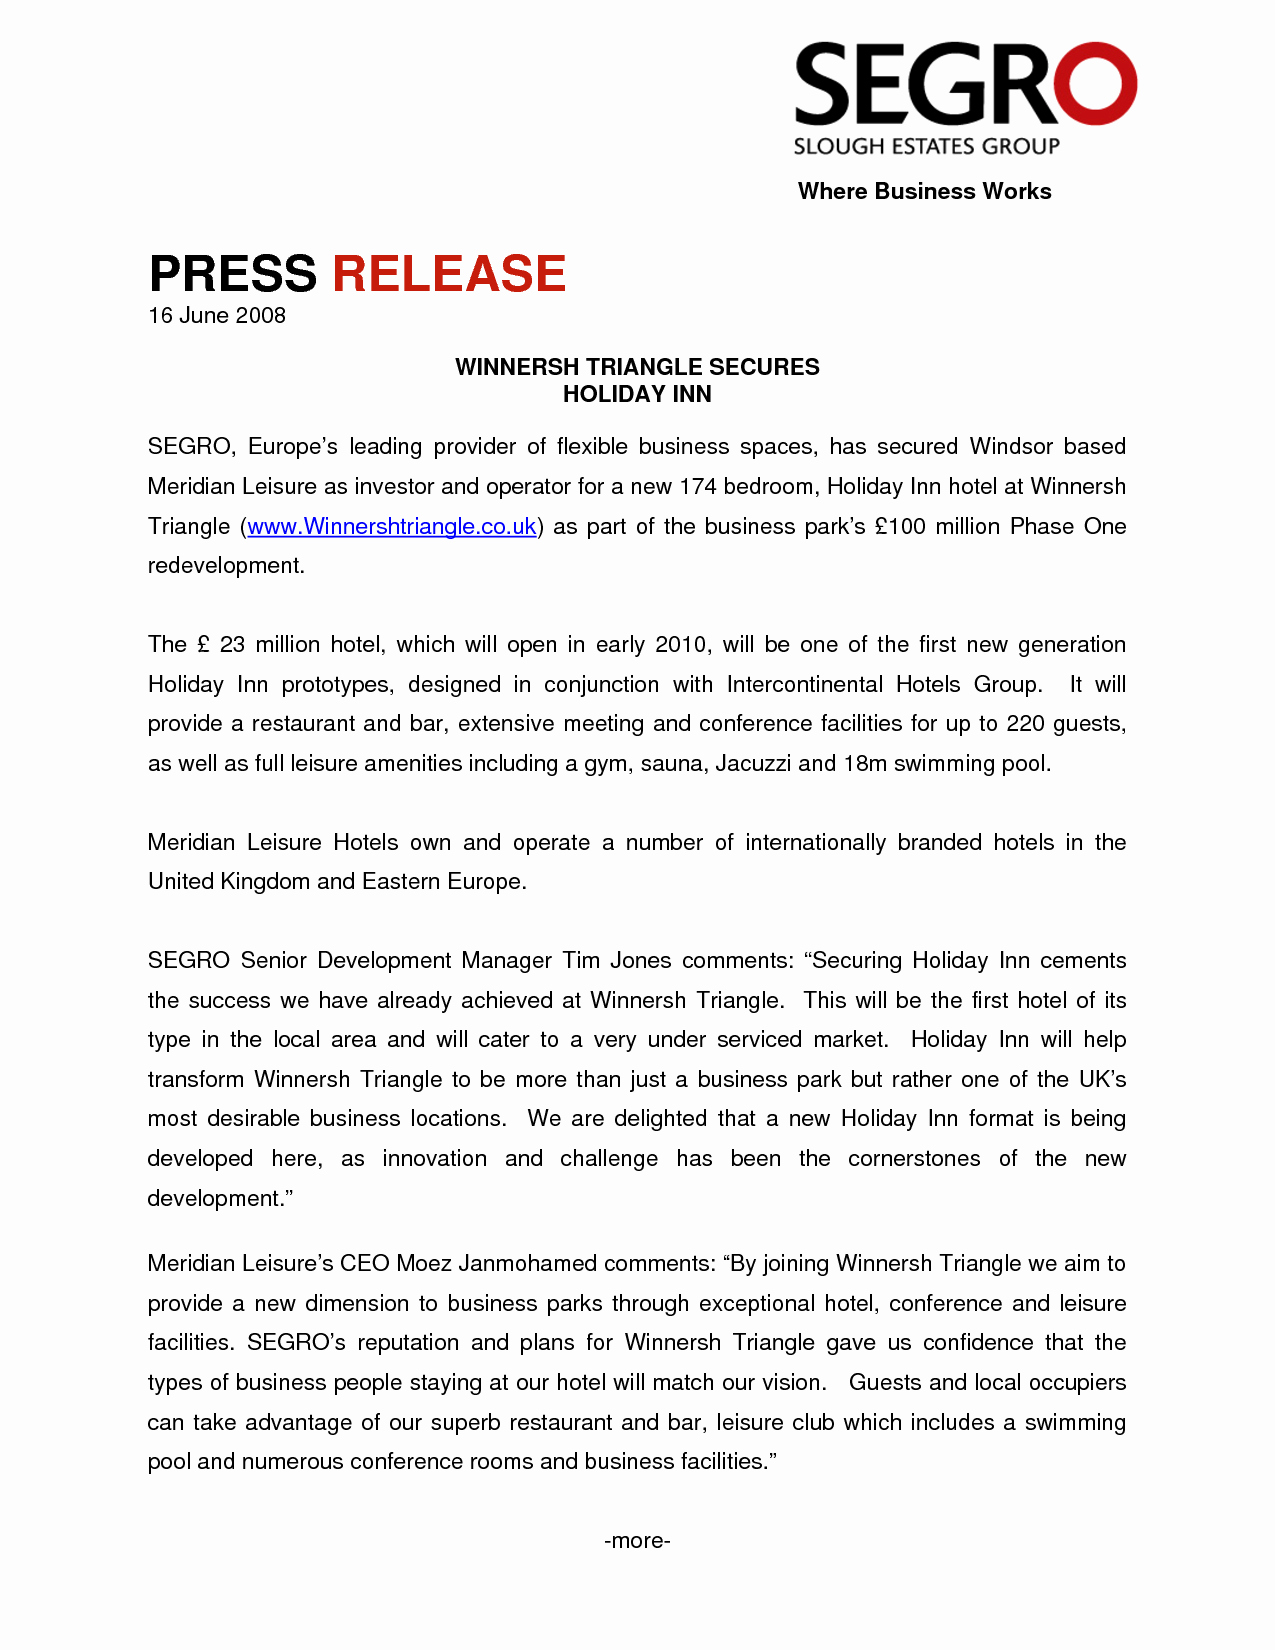 Press Release Template Free Awesome Press Release Outline Reverse Search